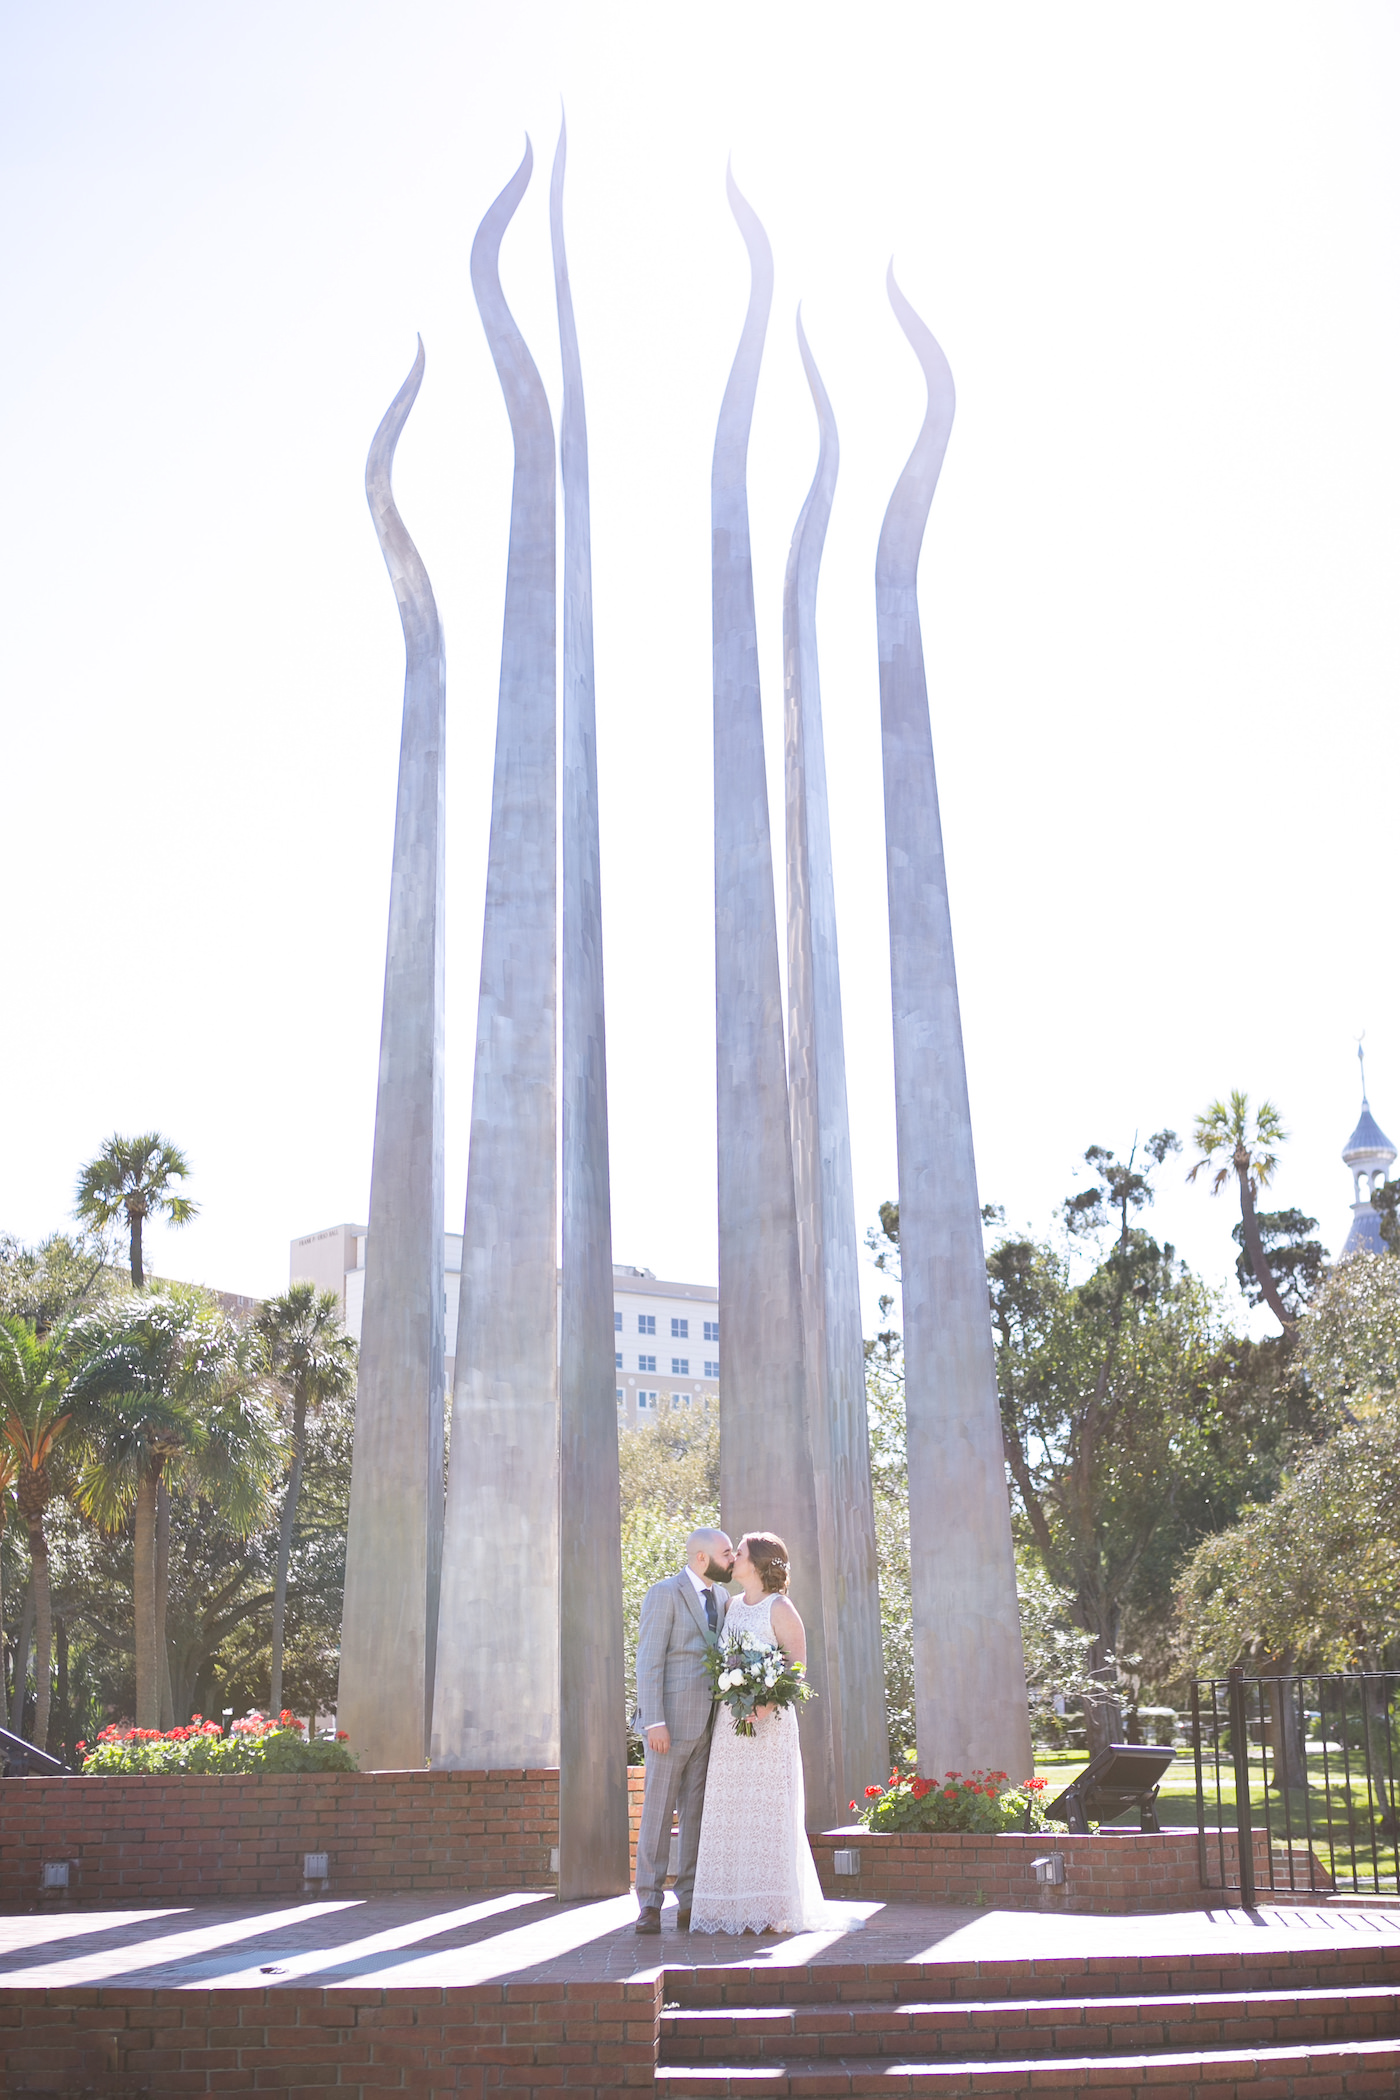 Florida Bride and Groom Portrait in Front of Sculptures at The University of Tampa | Wedding Photographer Carrie Wildes Photography